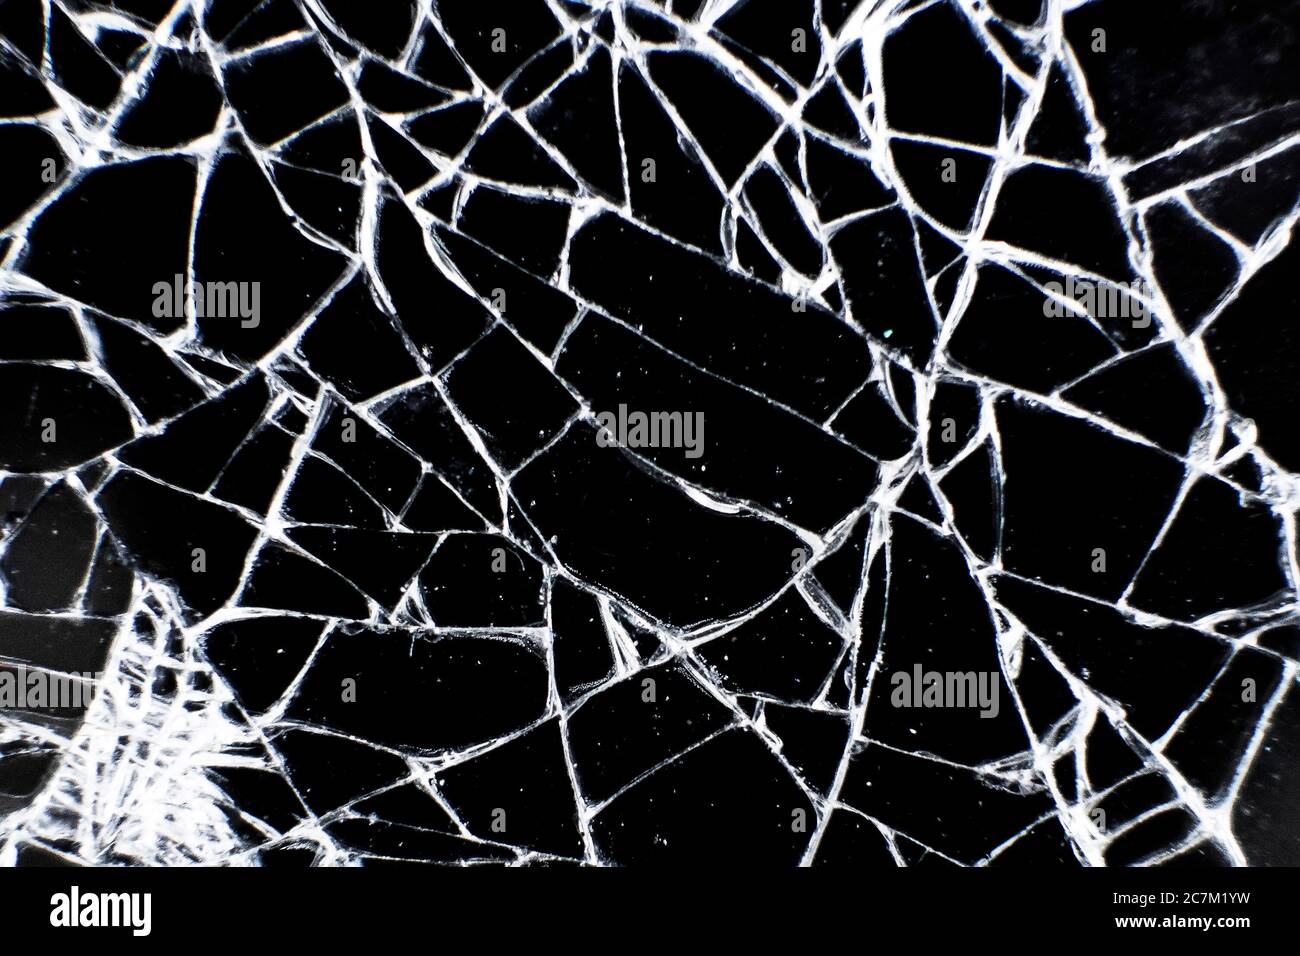 Broken glass tablet computer. Cracked screen. Cracks in the glass on black background. Stock Photo